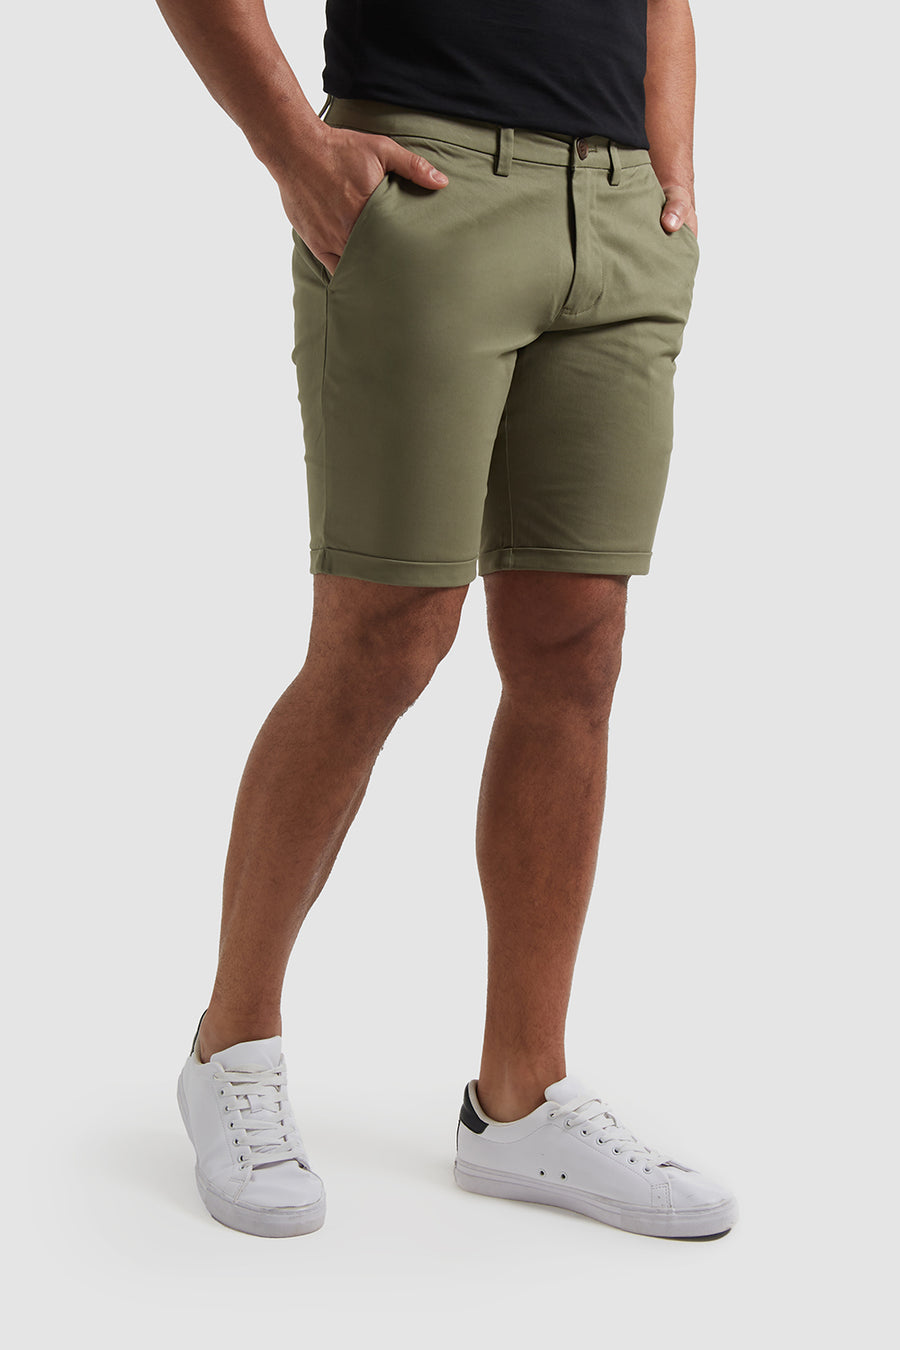 Athletic Fit Chino Shorts in Khaki - TAILORED ATHLETE - USA